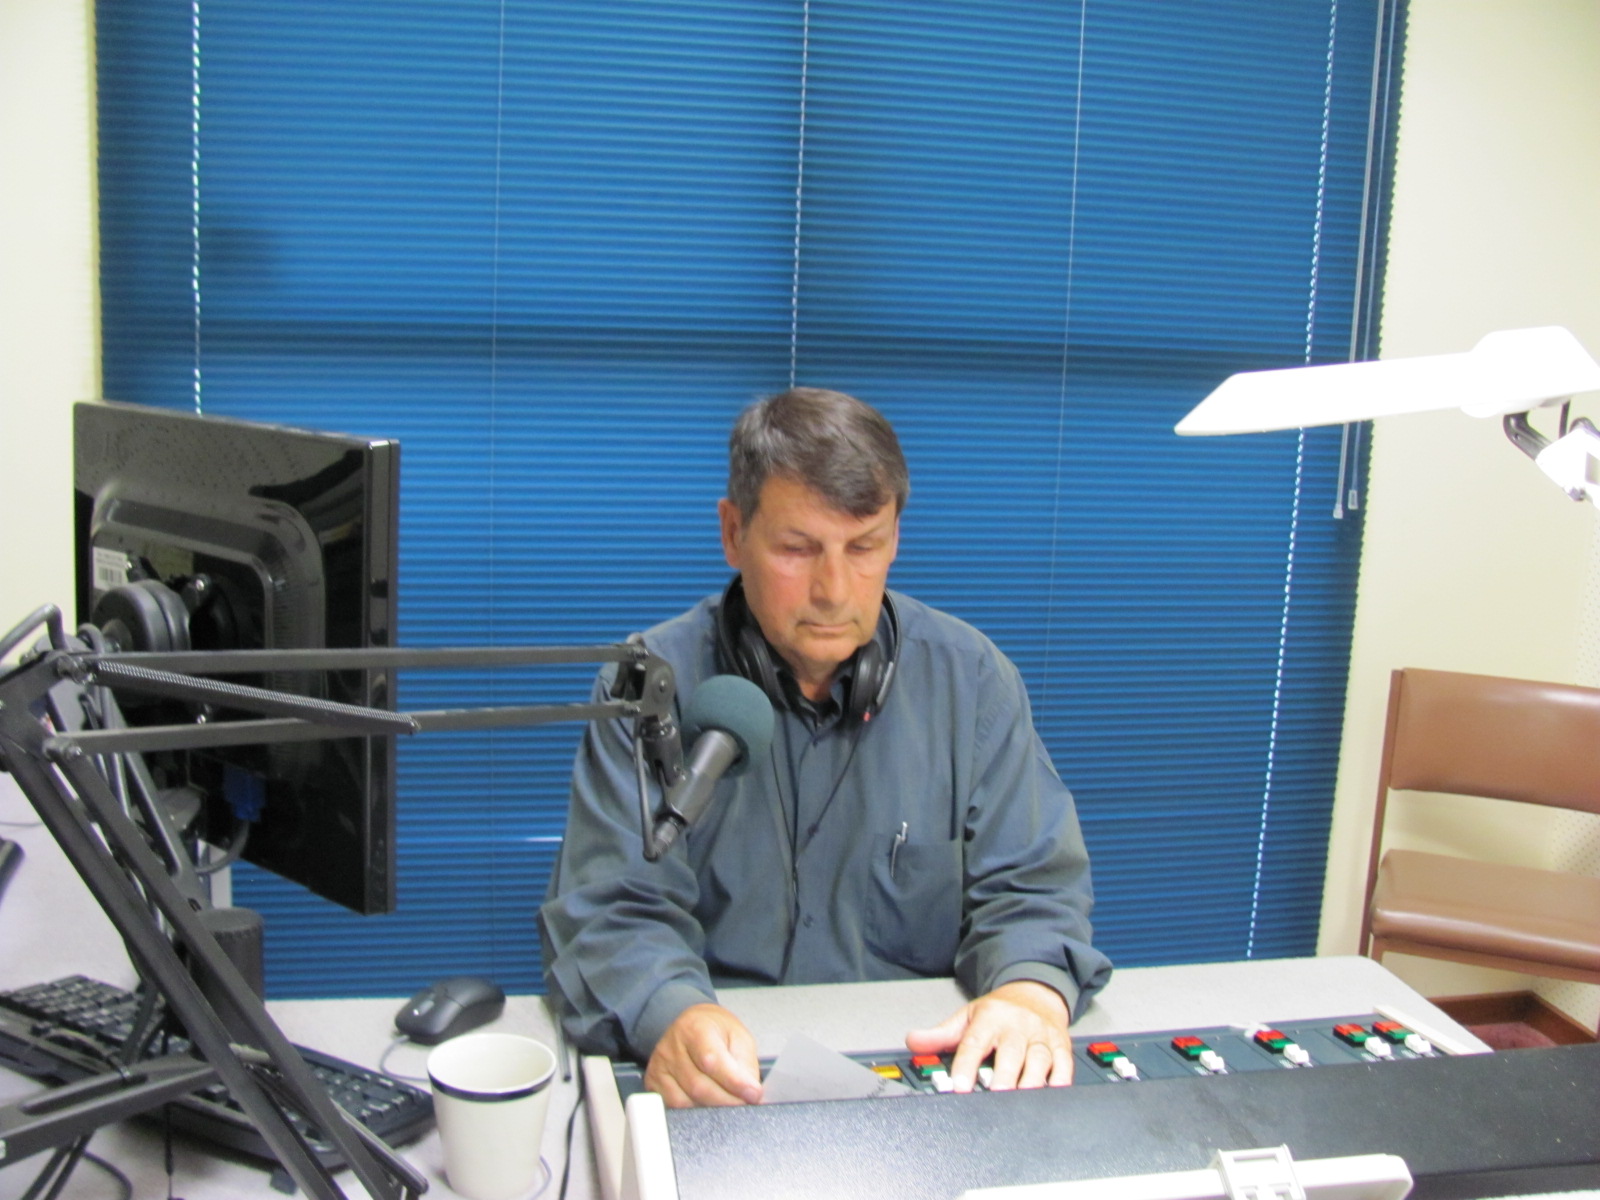 Volunteer sitting in a studio with a microphone in front of him